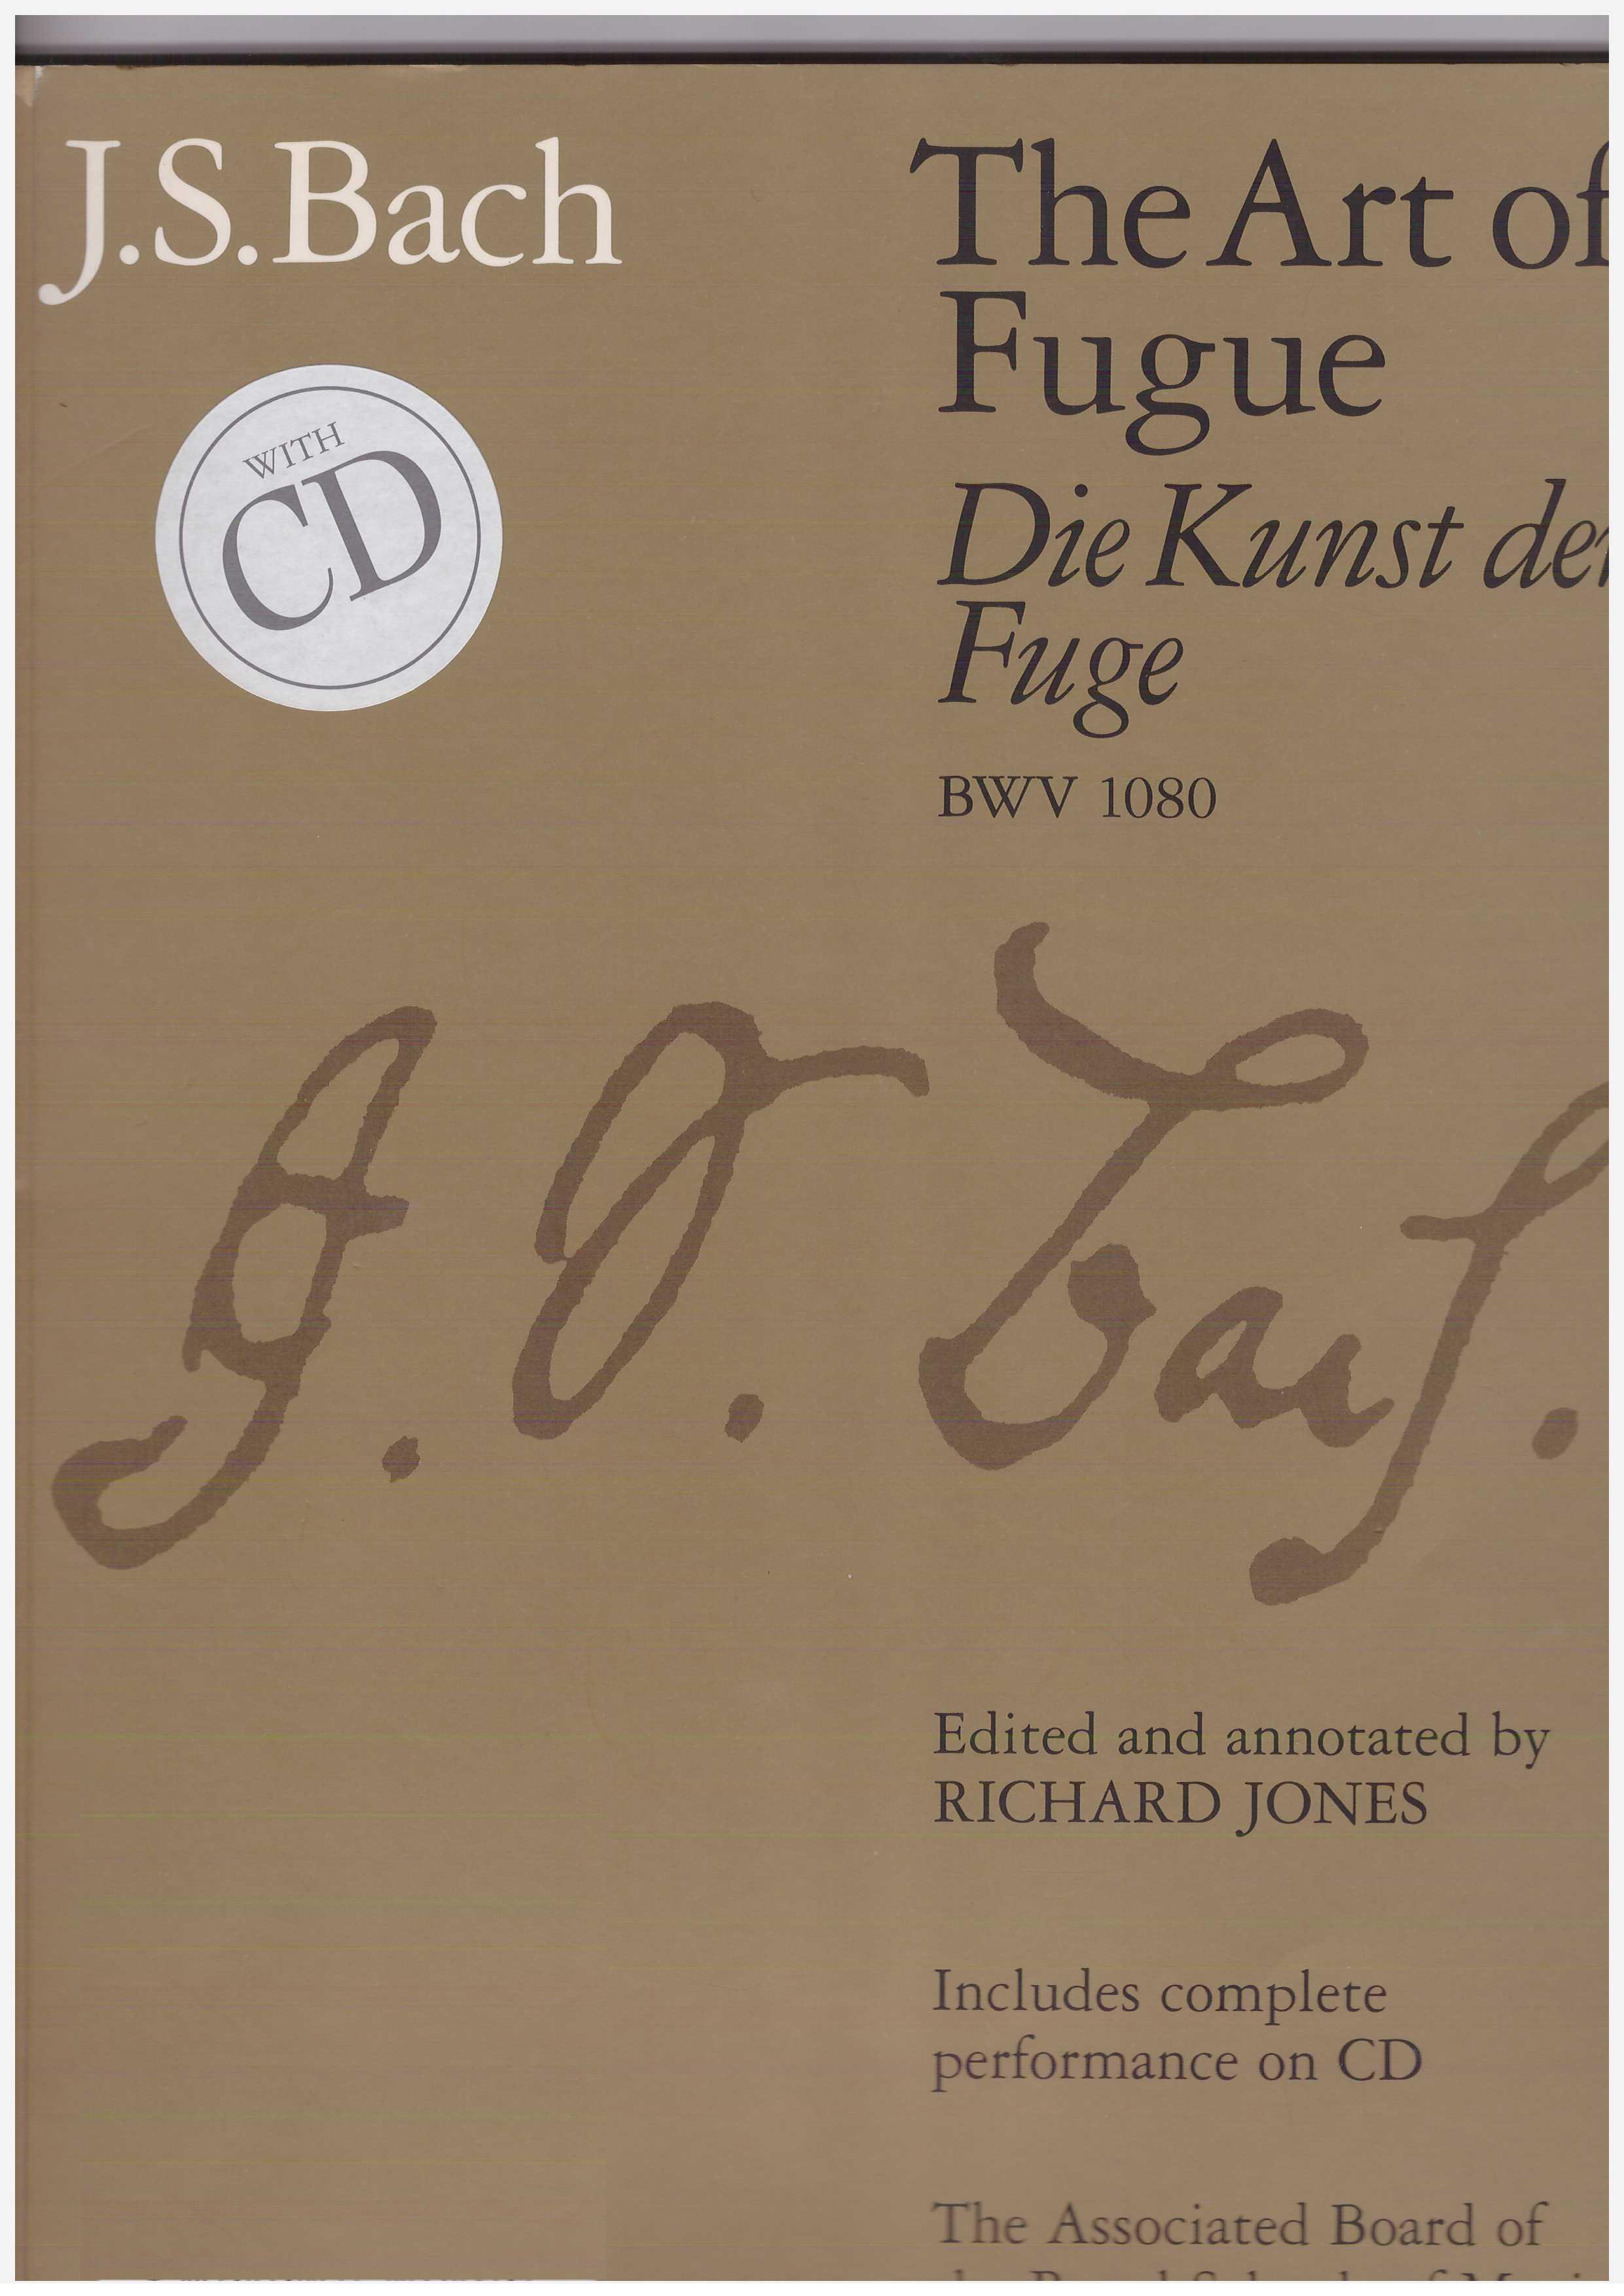 J.S. Bach: The Art of Fugue BWV 1080 with CD